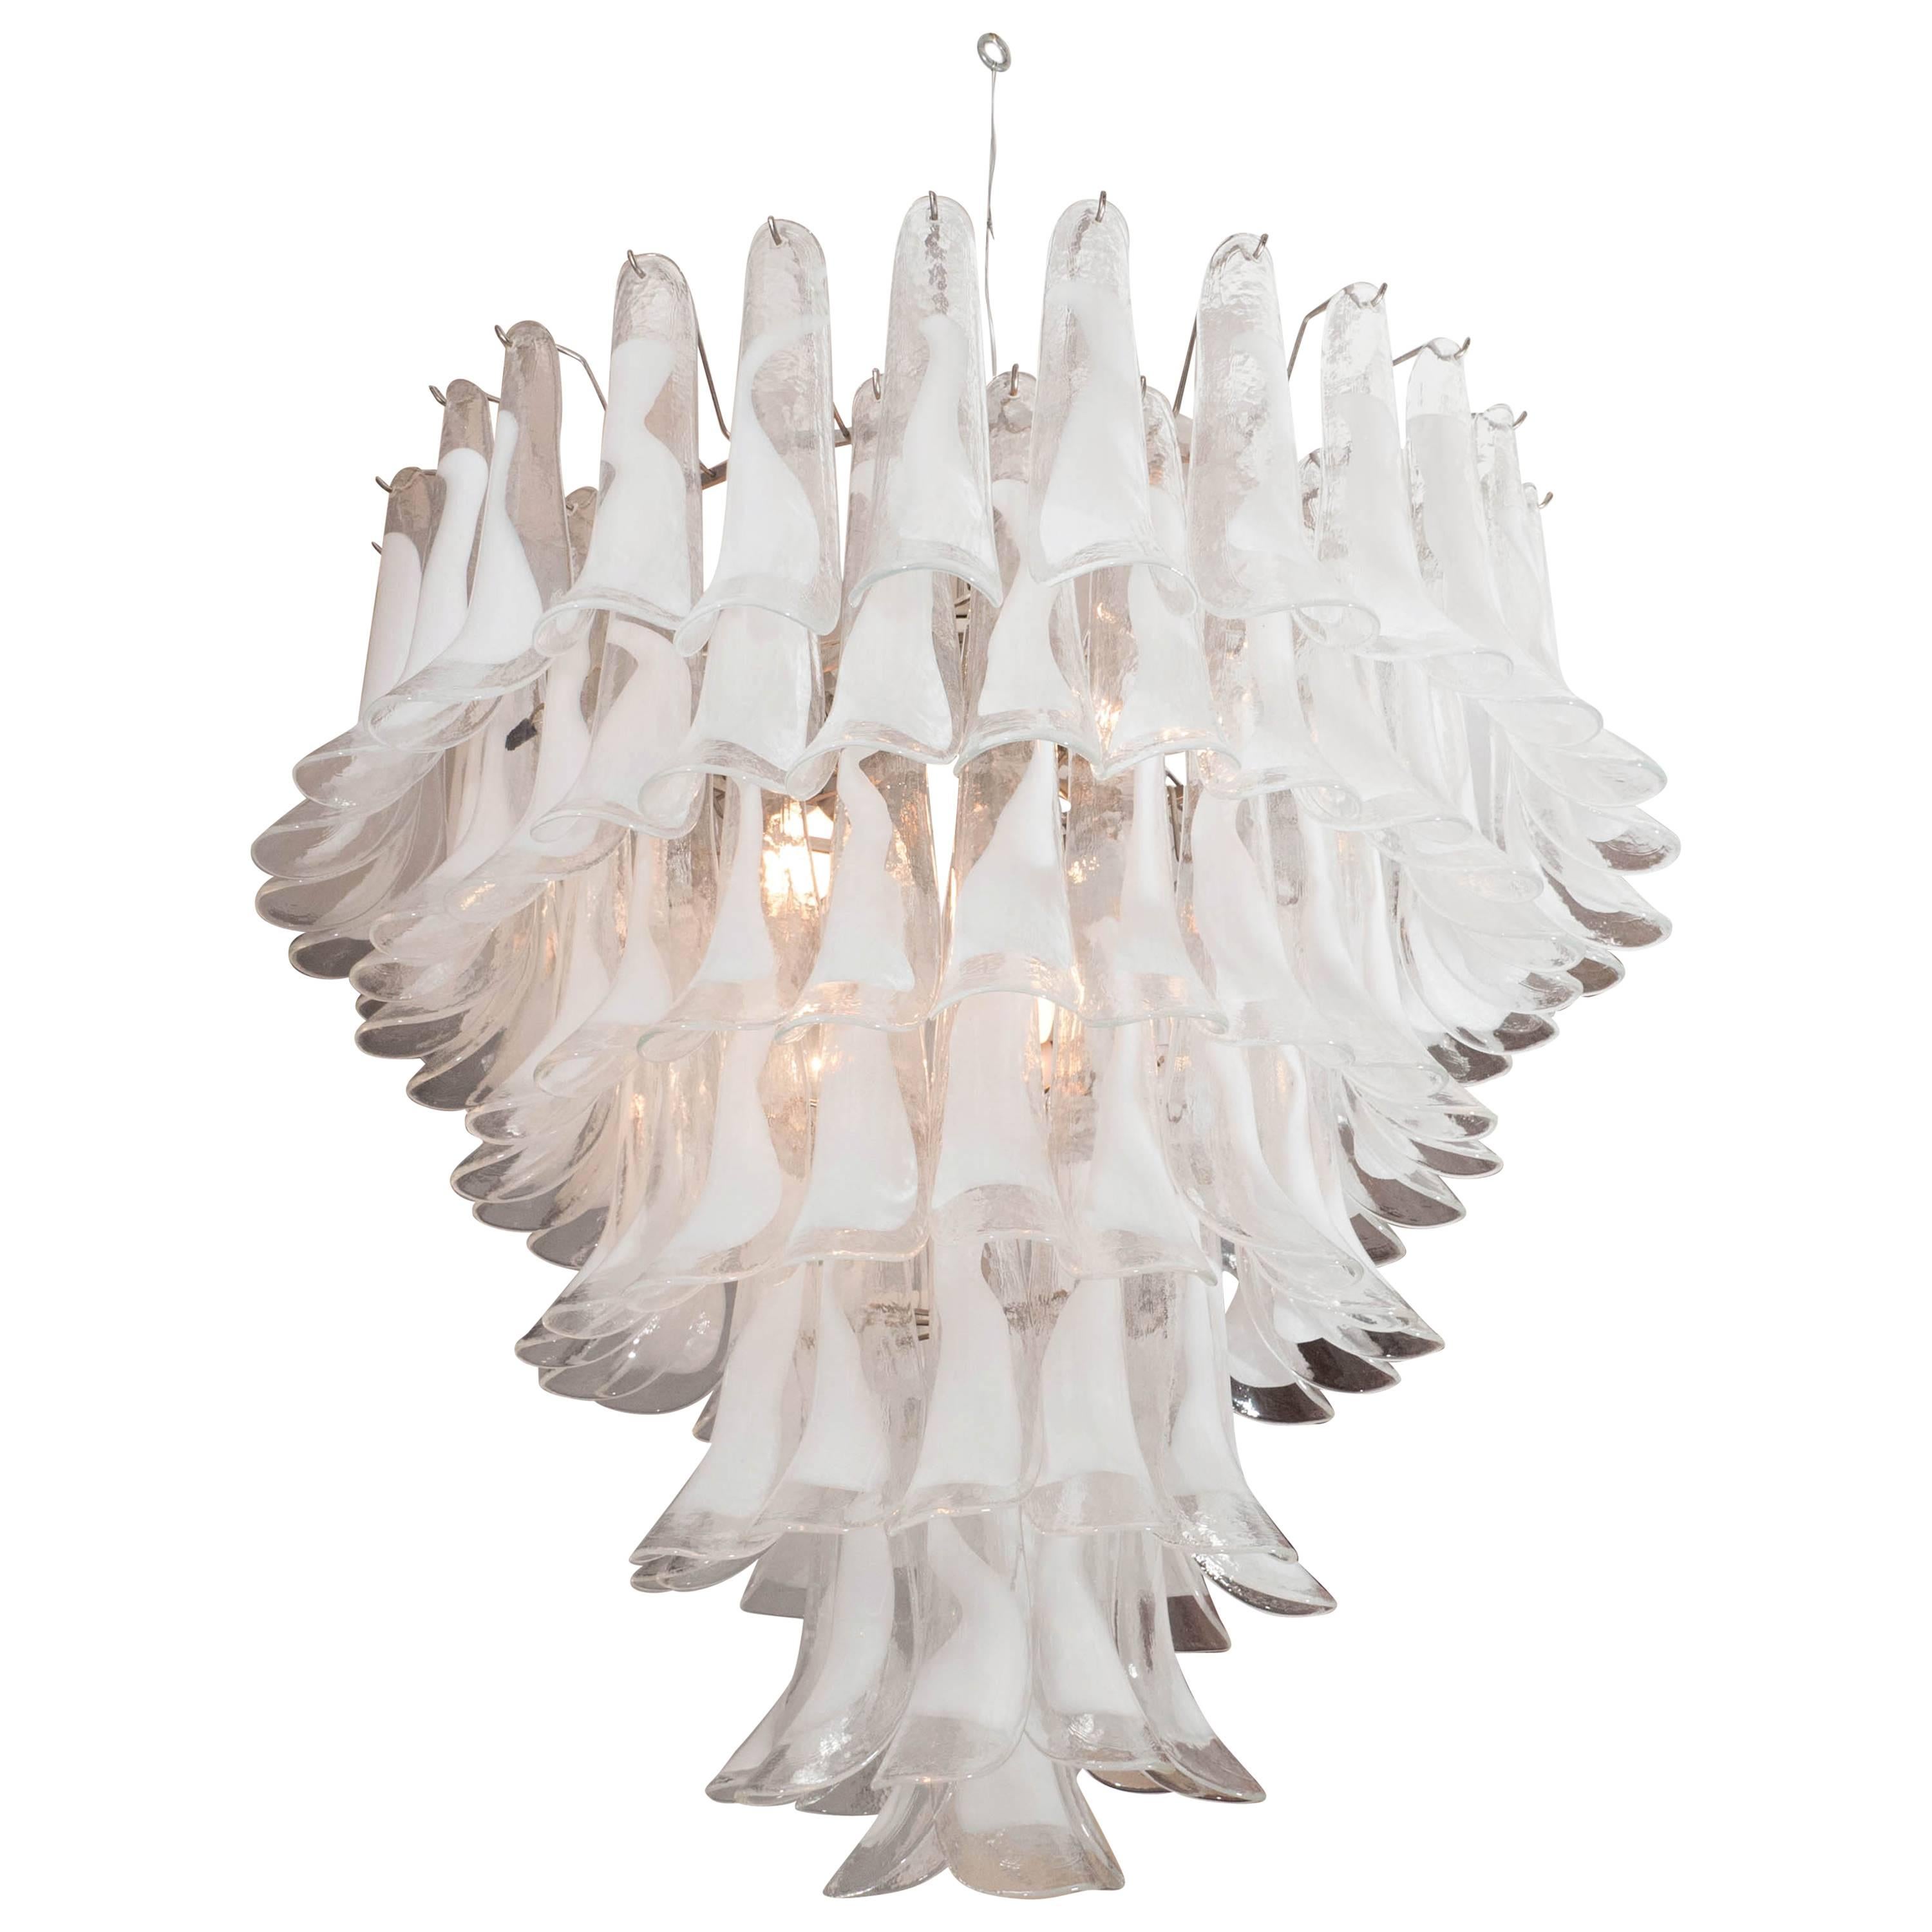 Huge Mazzega White and Clear Glass Petal Chandeliers, 2 of 2 (Remaining Balance)